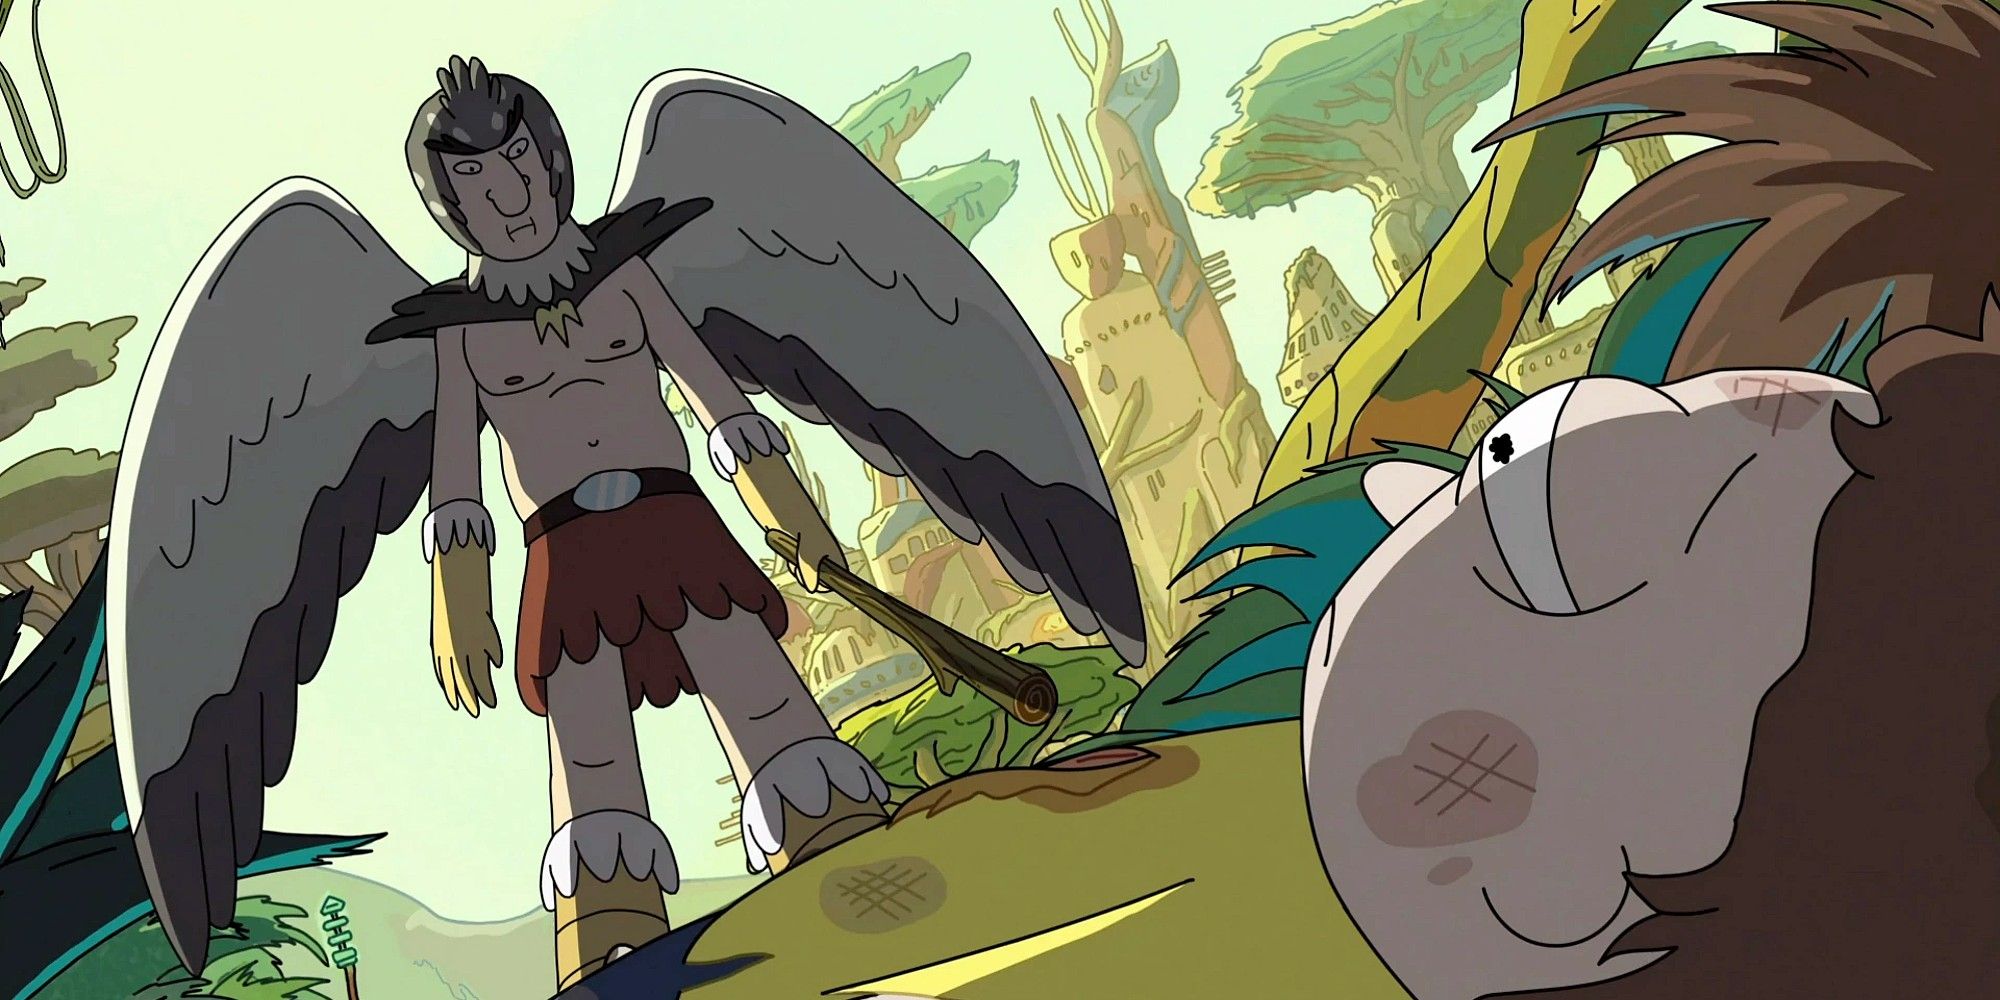 Birdperson in Rick and Morty